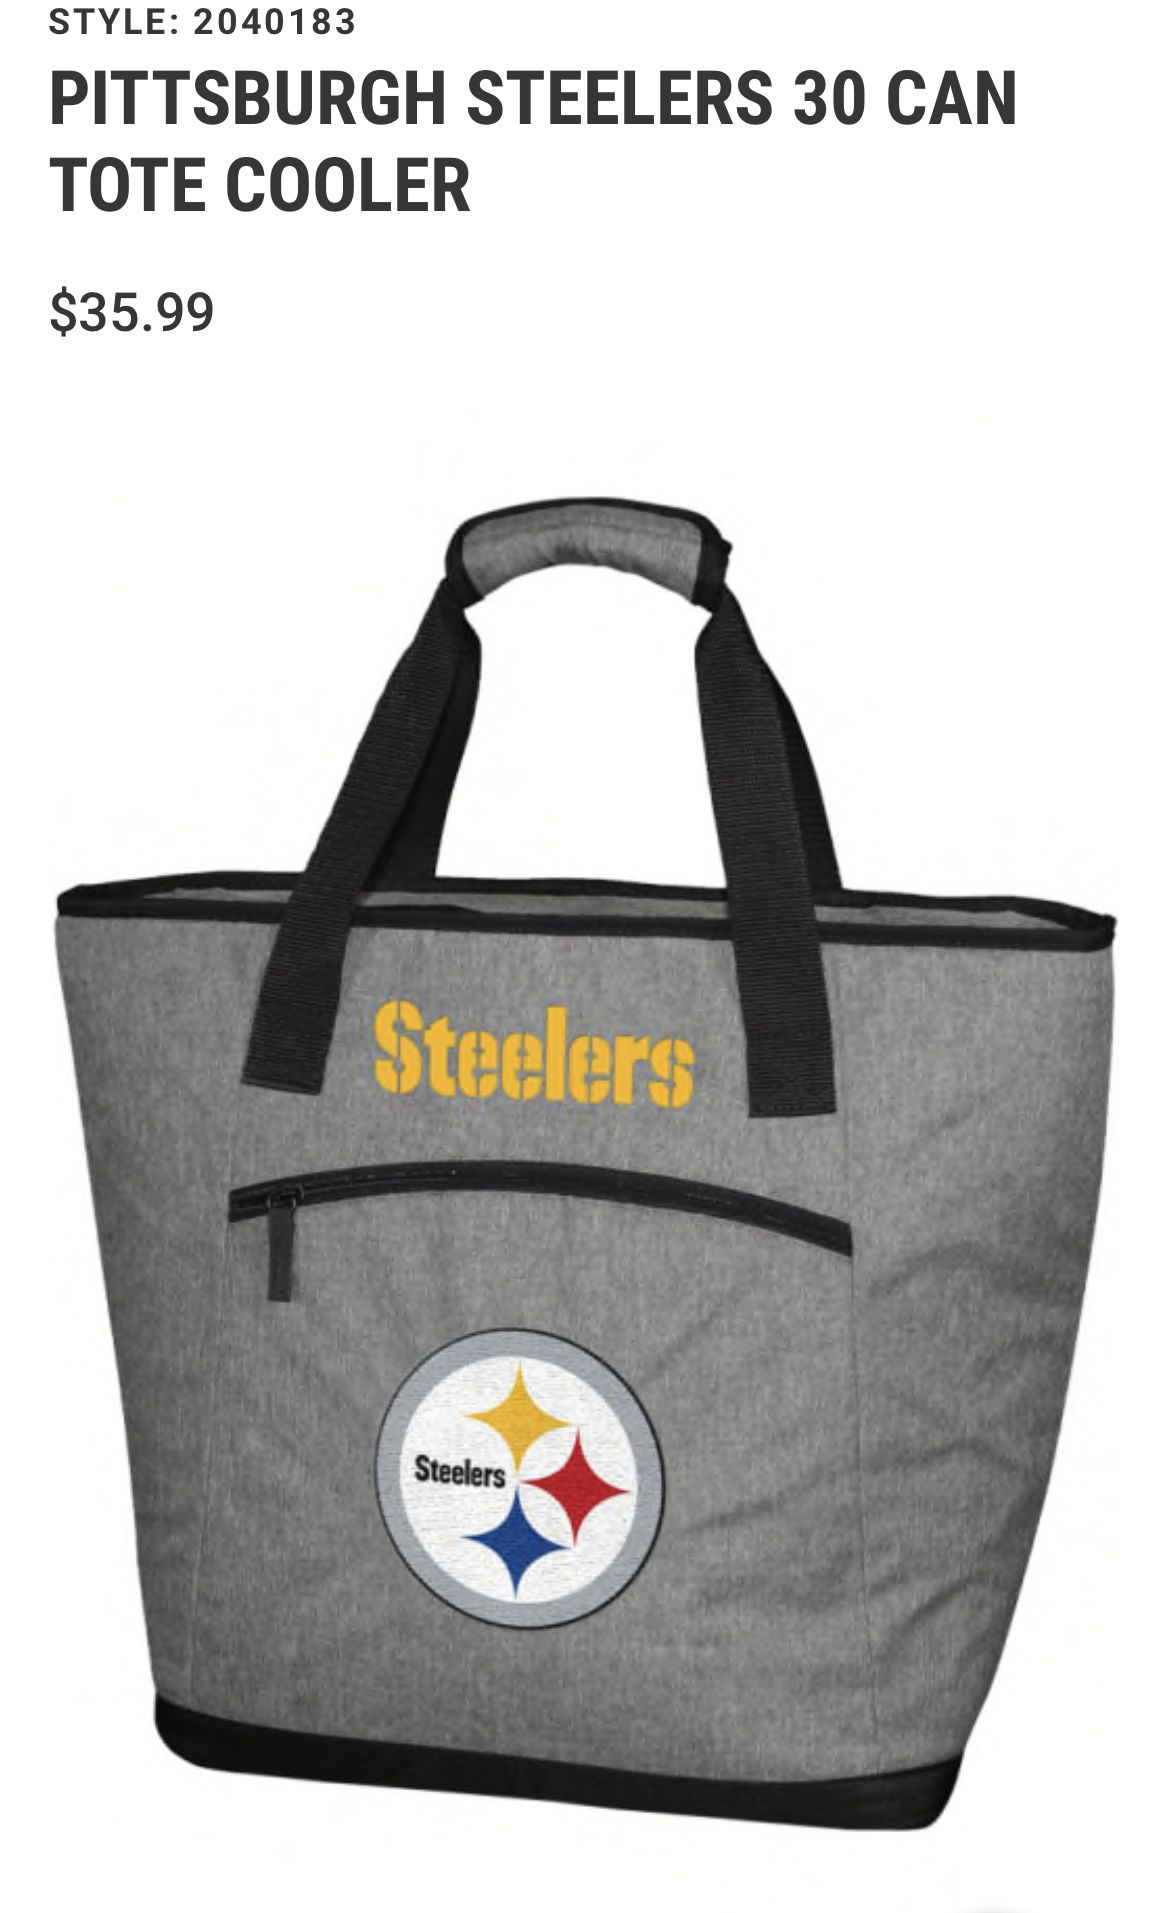 NFL Pittsburgh Steelers Insulated  Cooler Tote 30 Cans, Tailgate bag, NFL NWT